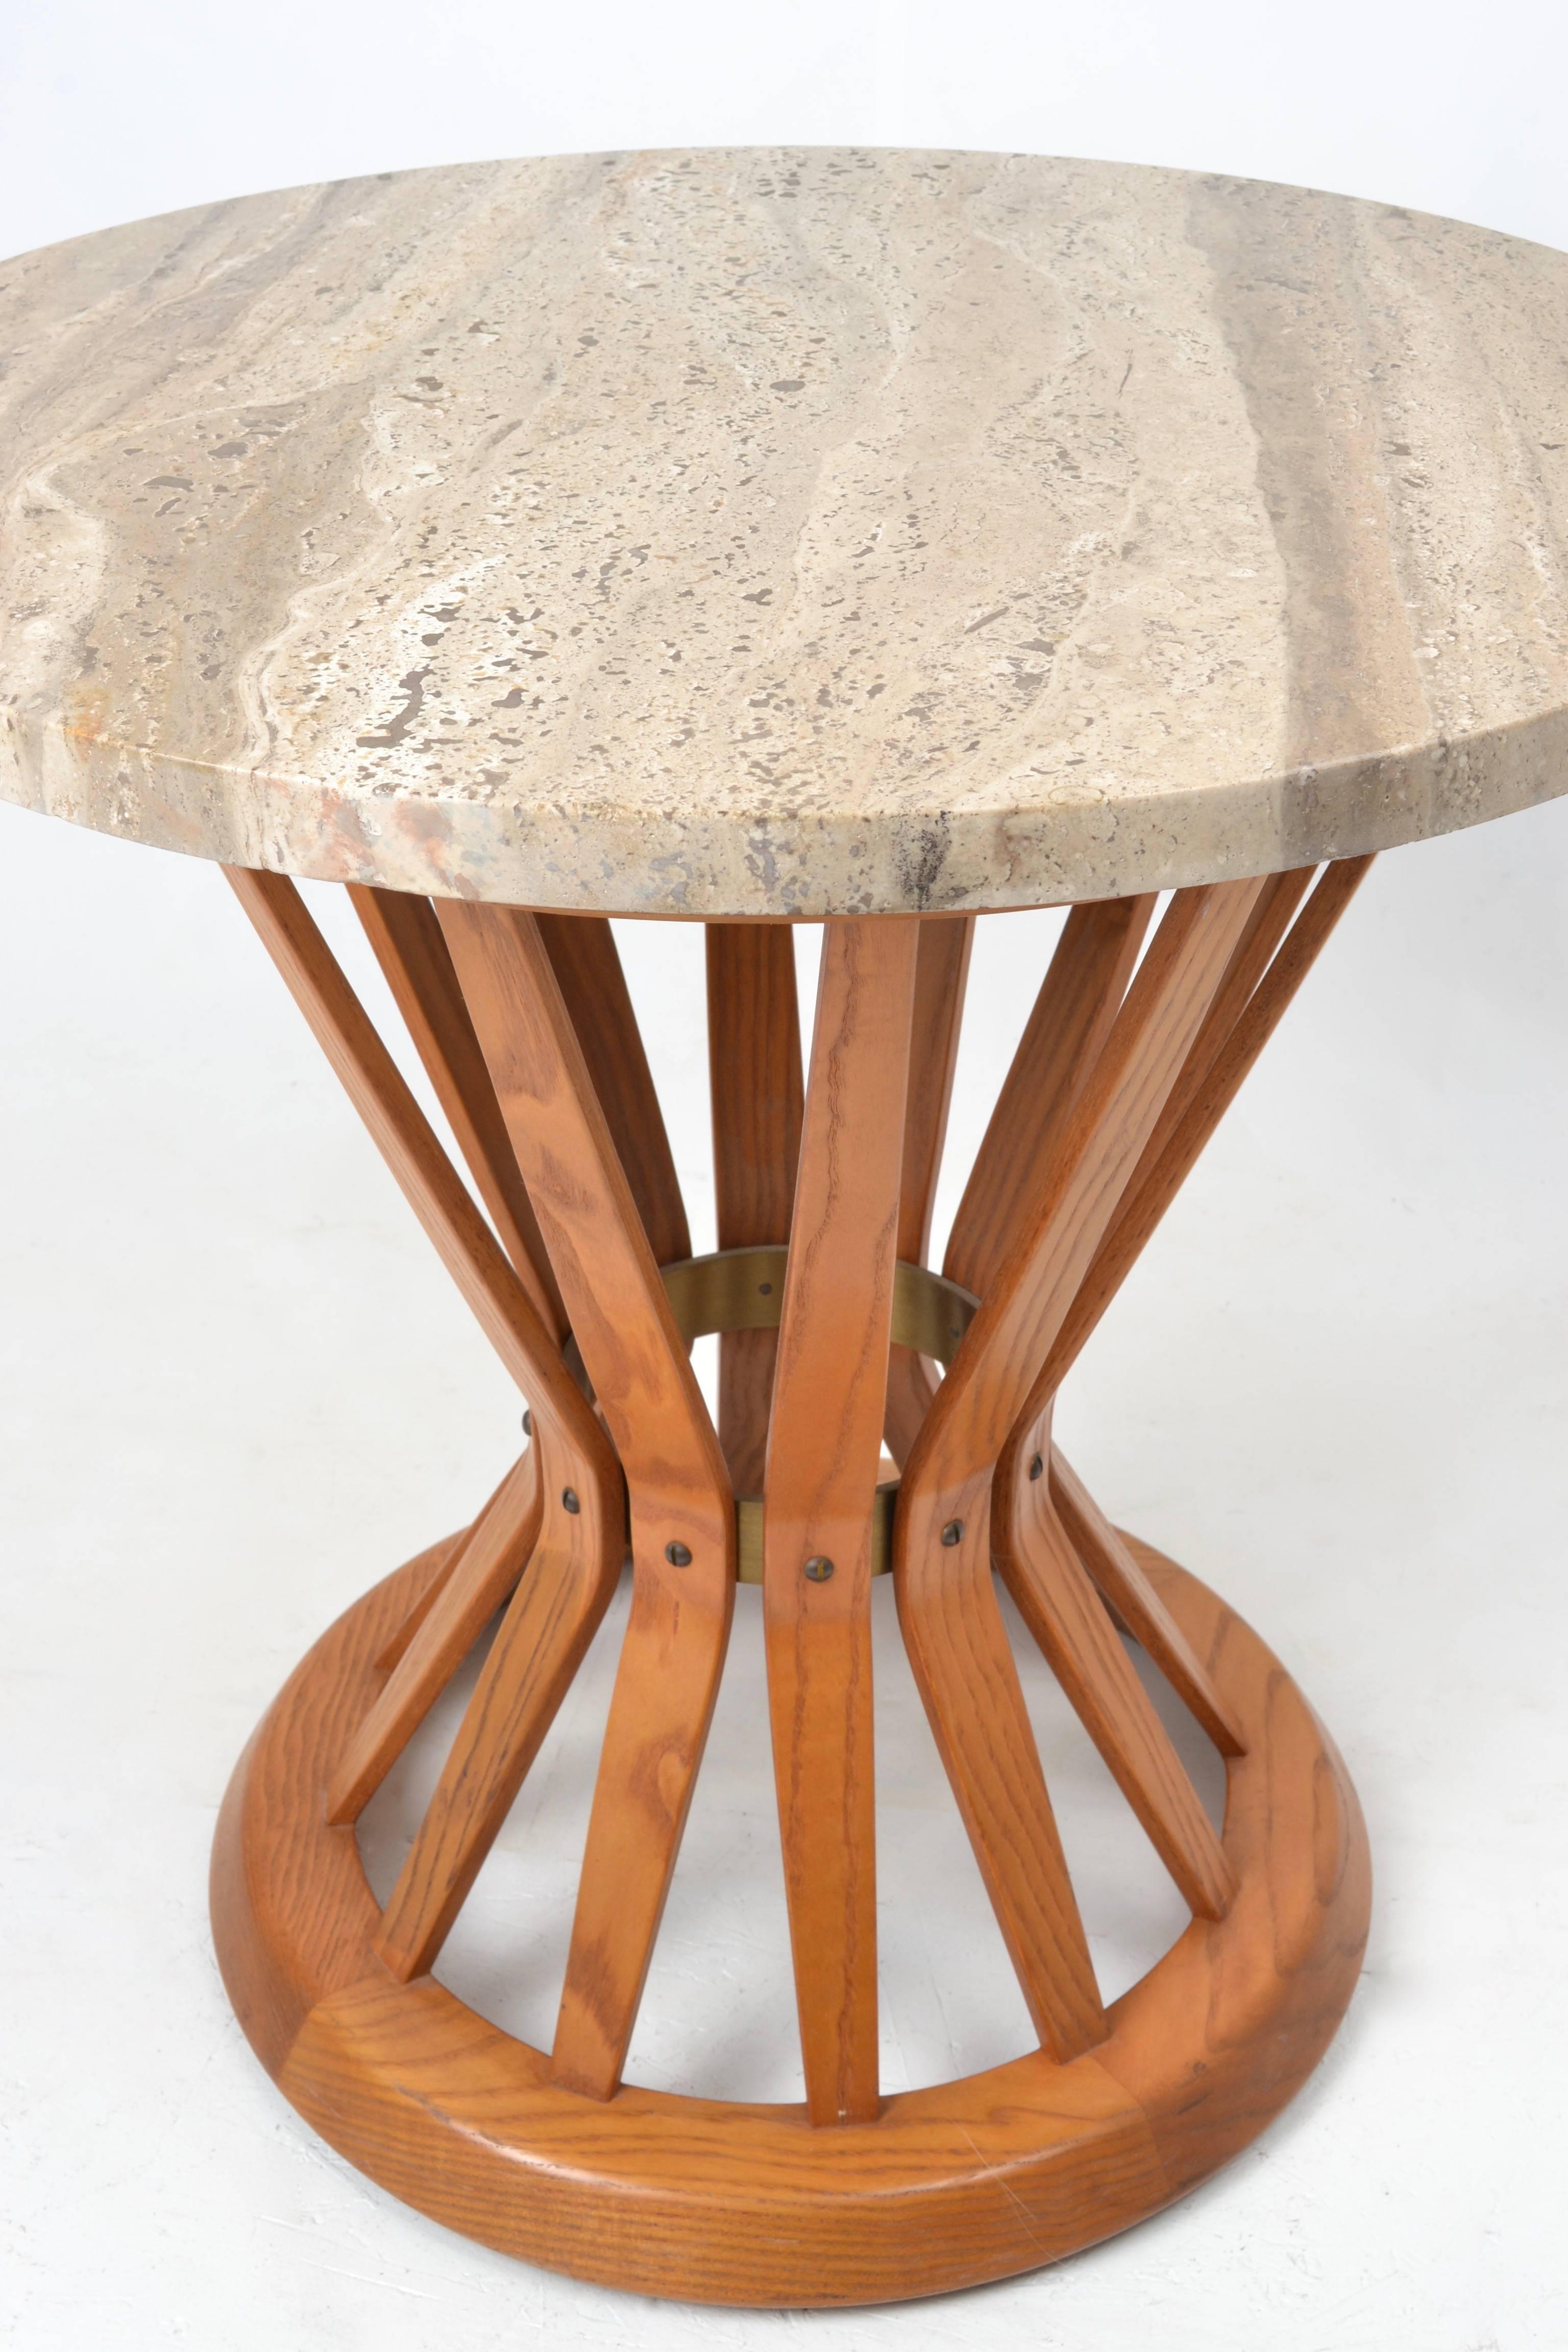 A very clean example of Edward Wormley's "Sheaf of Wheat" side table made by Dunbar, circa 1960s. Oak base with Italian travertine marble top. Both top and base in very fine condition. Dunbar tag attached to underside of table. Marble